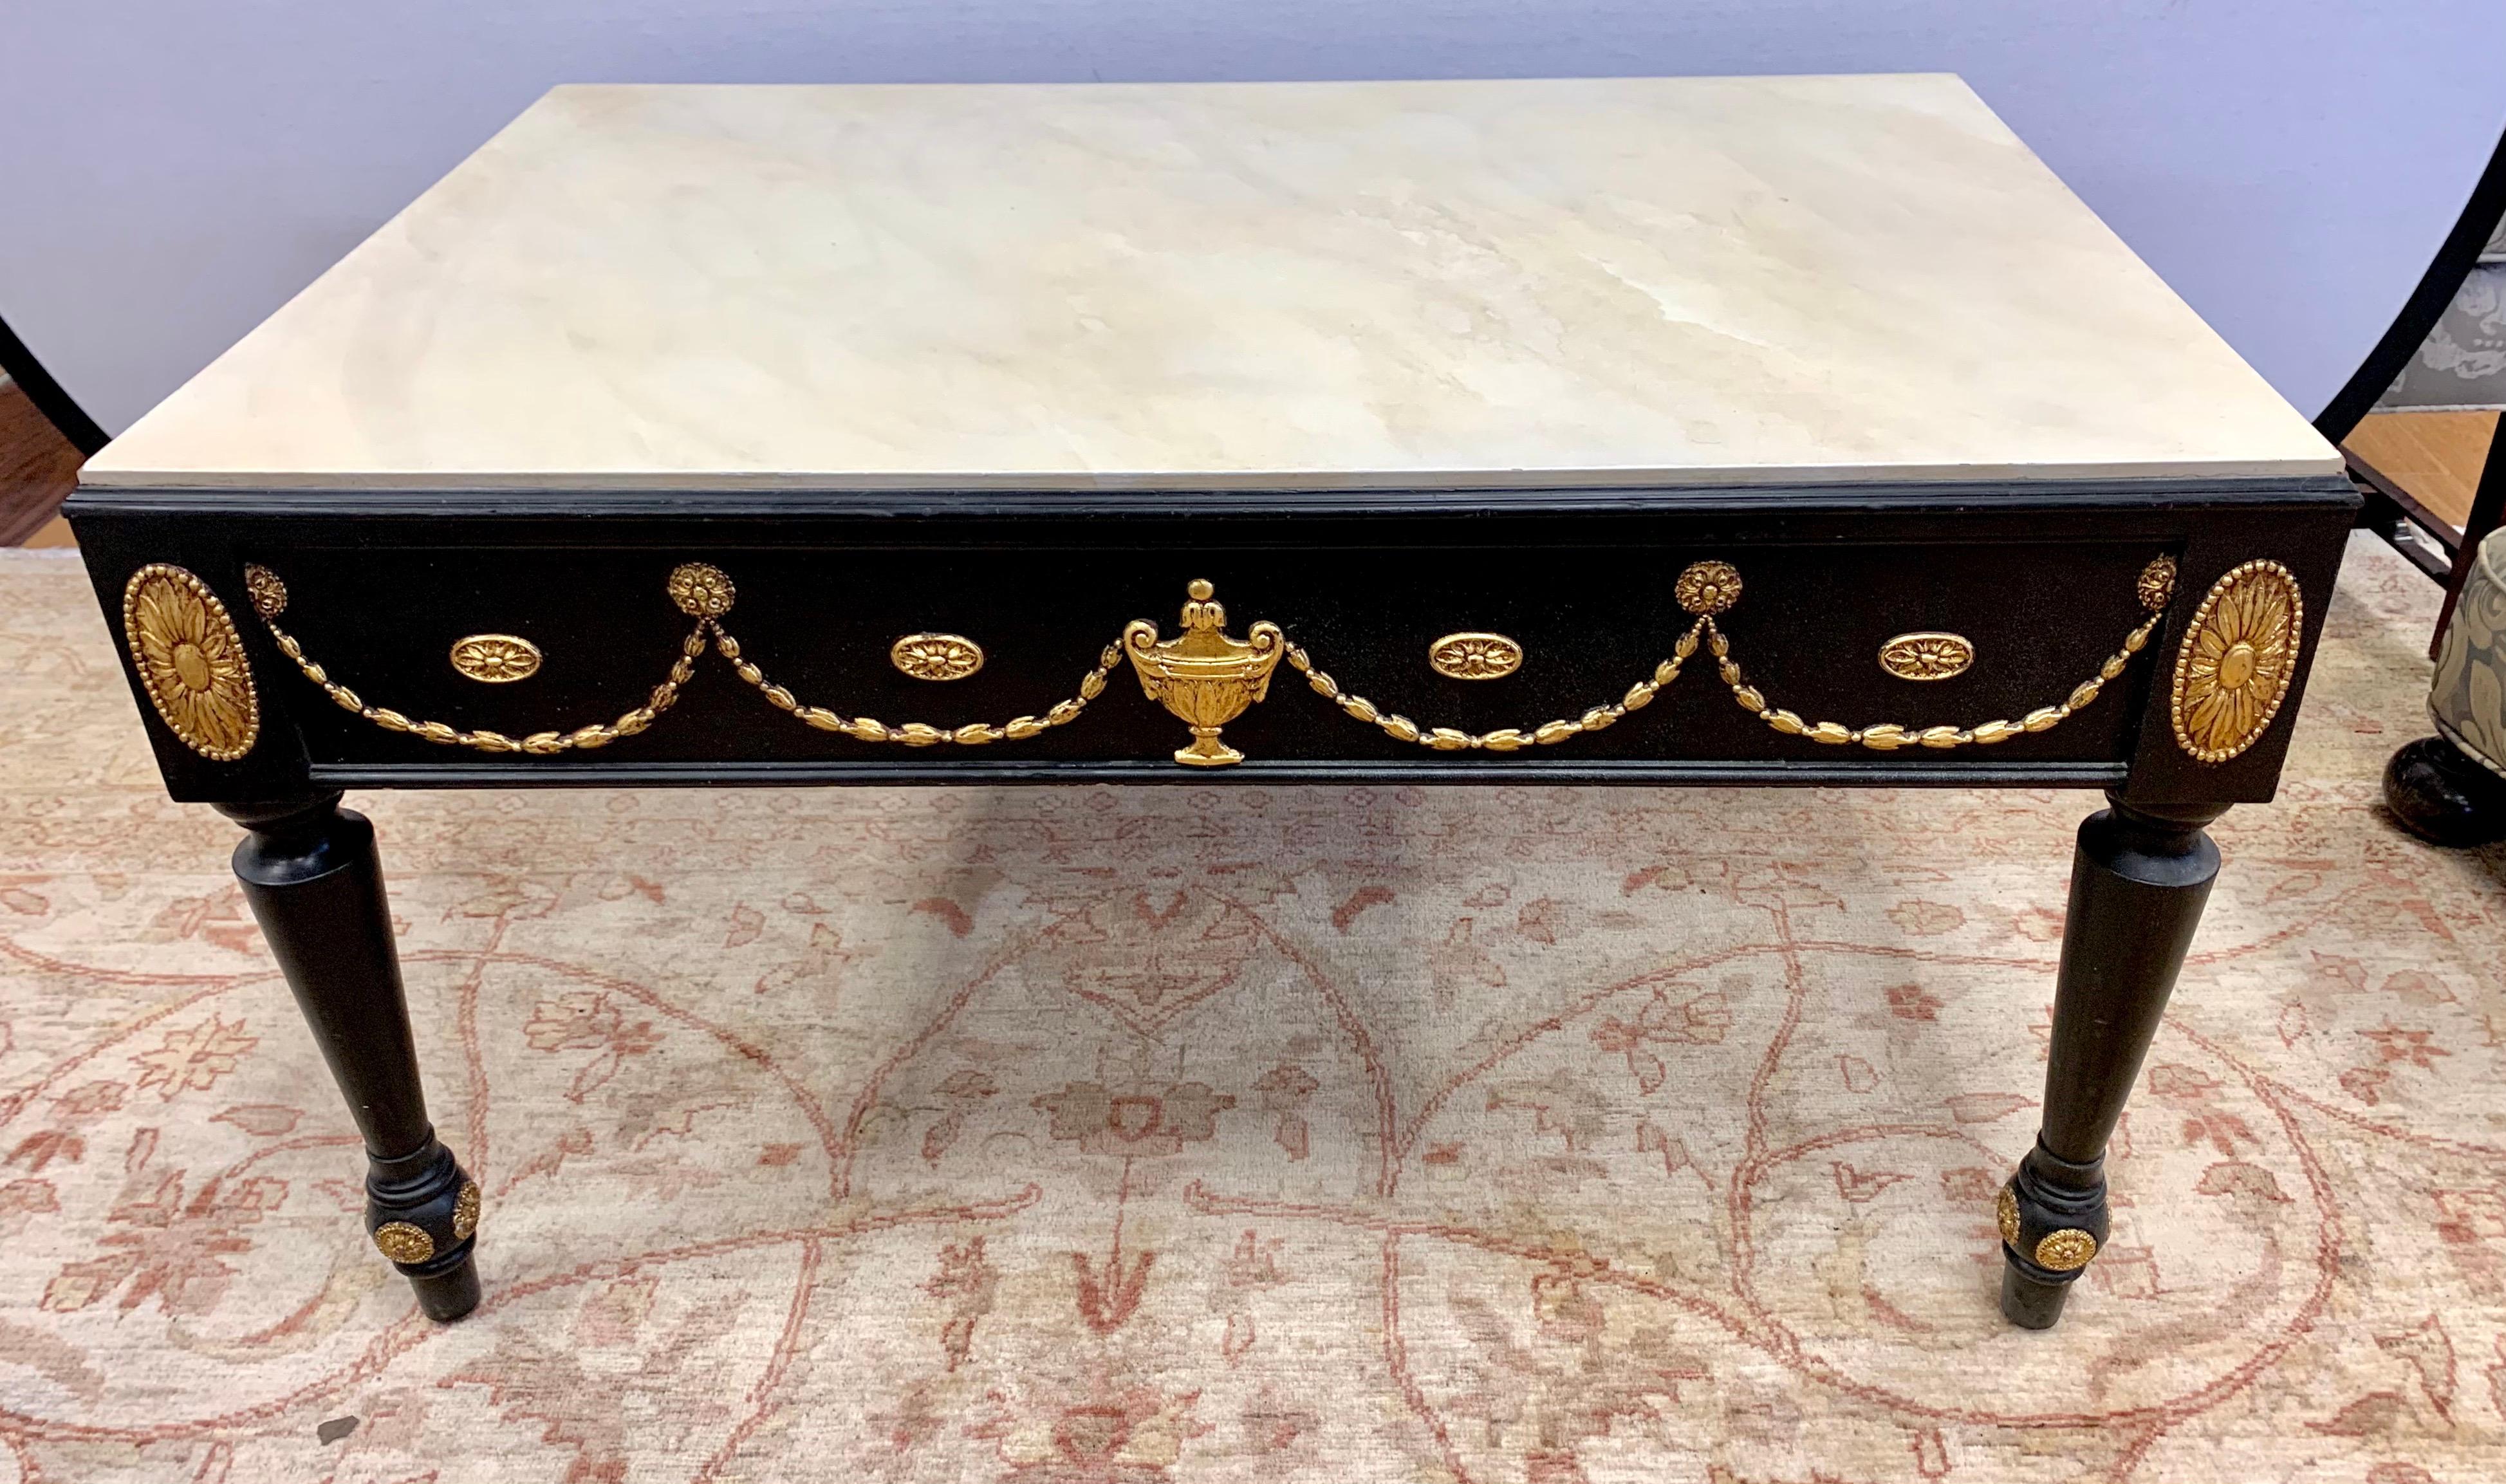 Modeled after a French antique, this hand painted black coffee table inspires a bit of 18th century refinement with a faux painted cream marble top and giltwood medallions and urns.